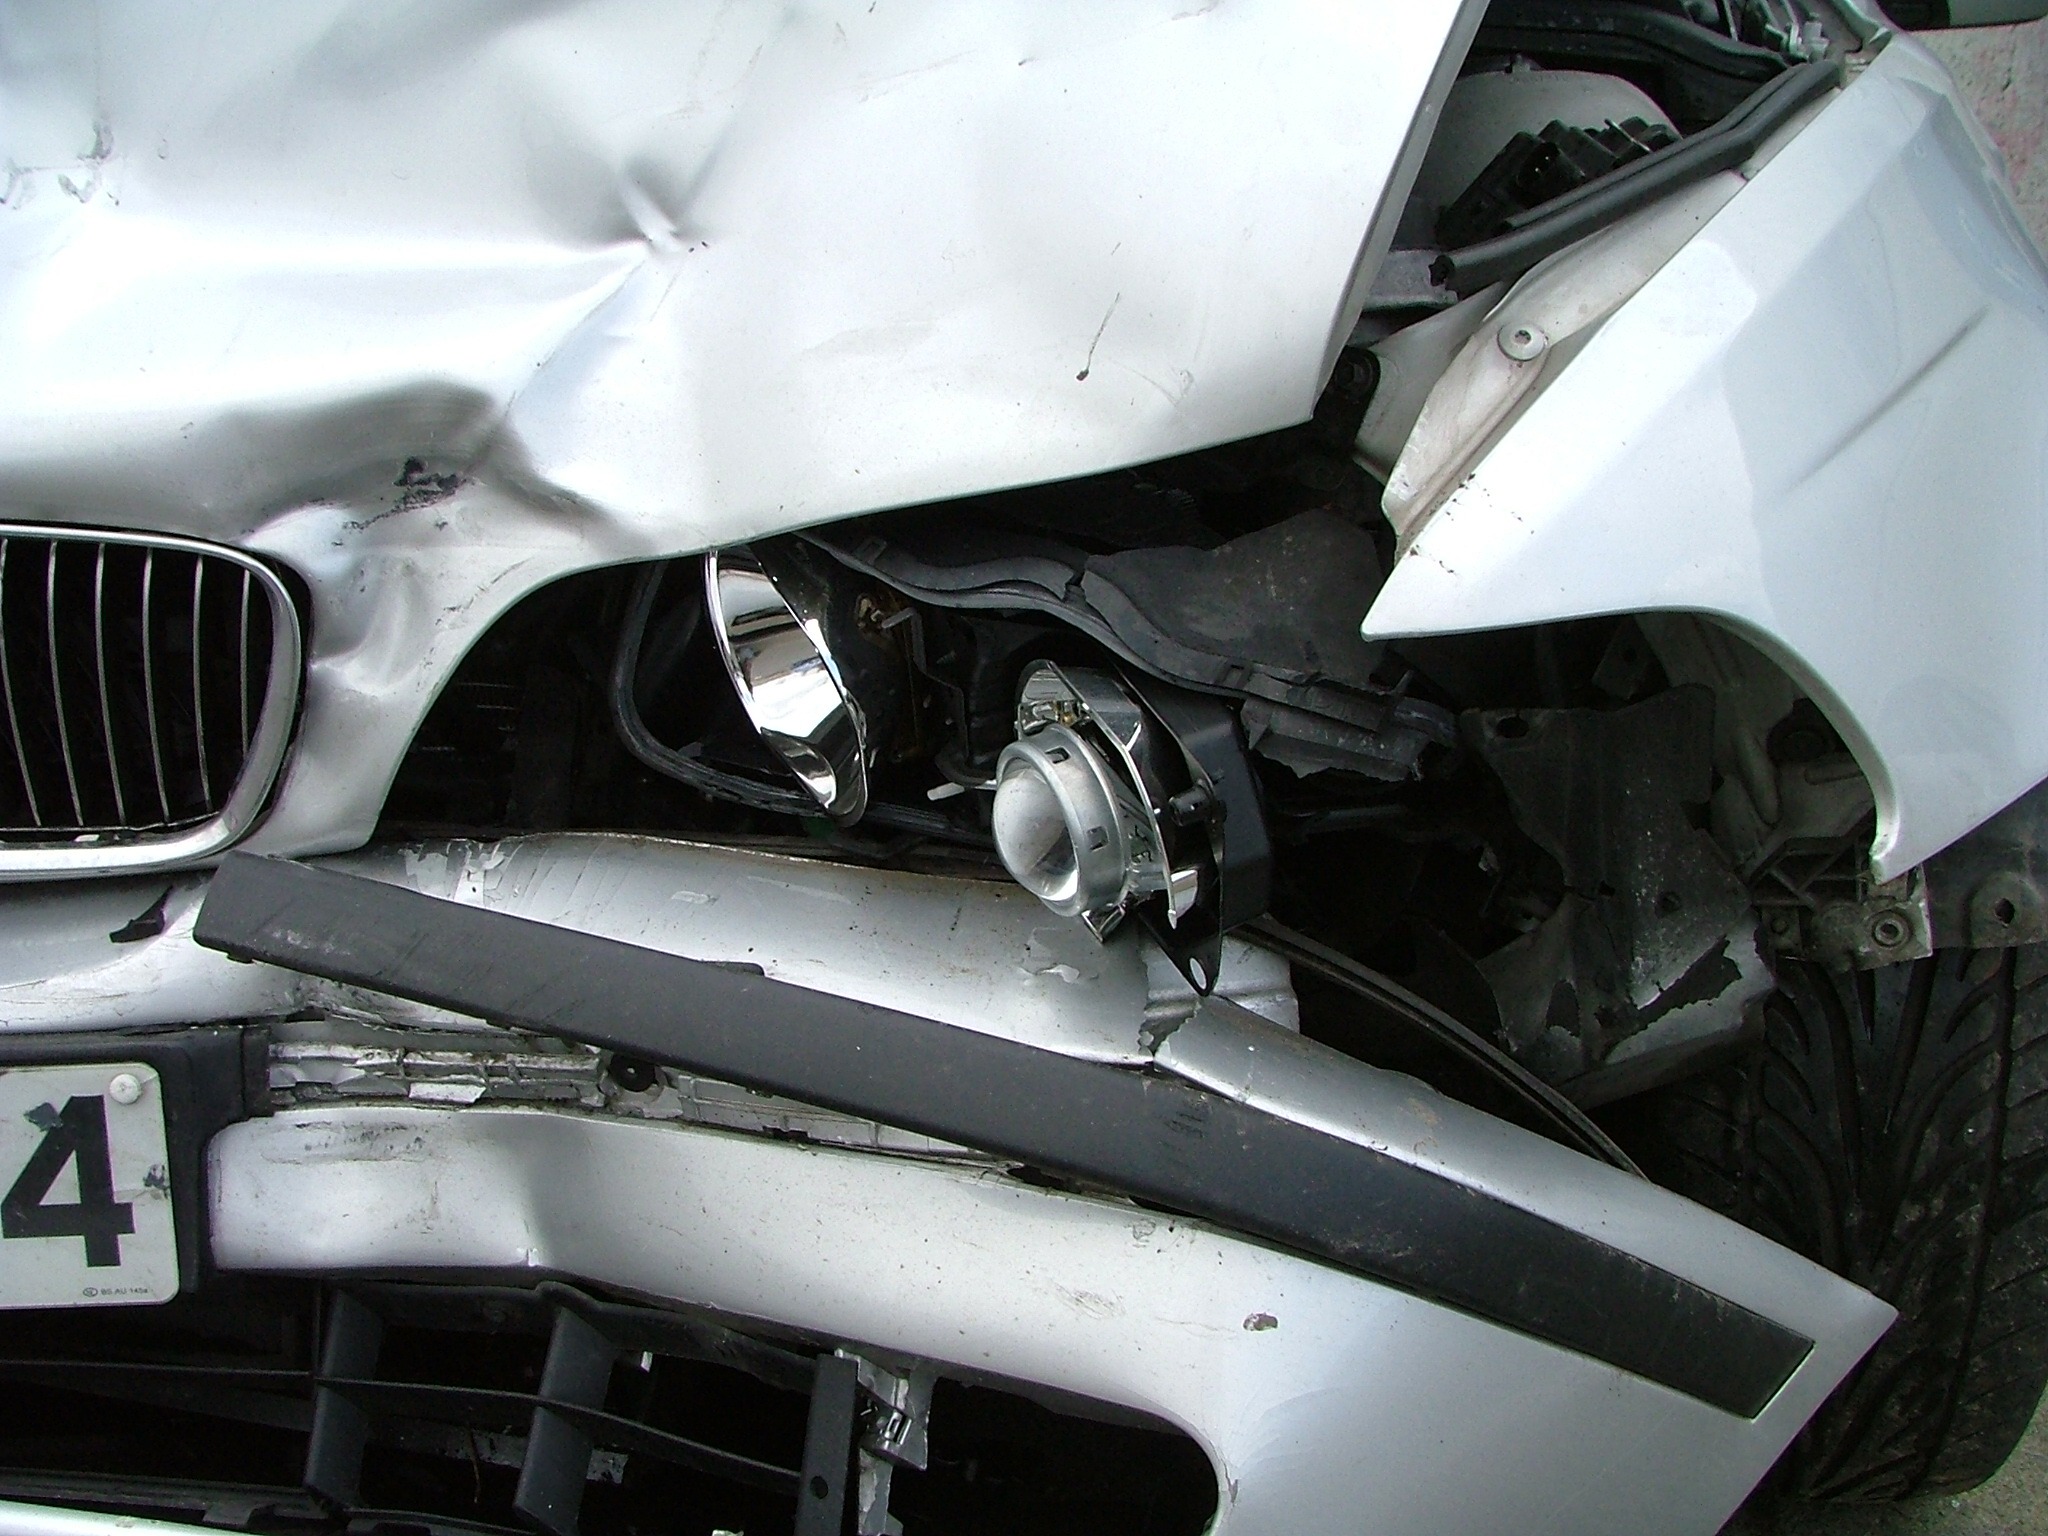 Proposed Auto Insurance Hikes Could Help Injured Drivers